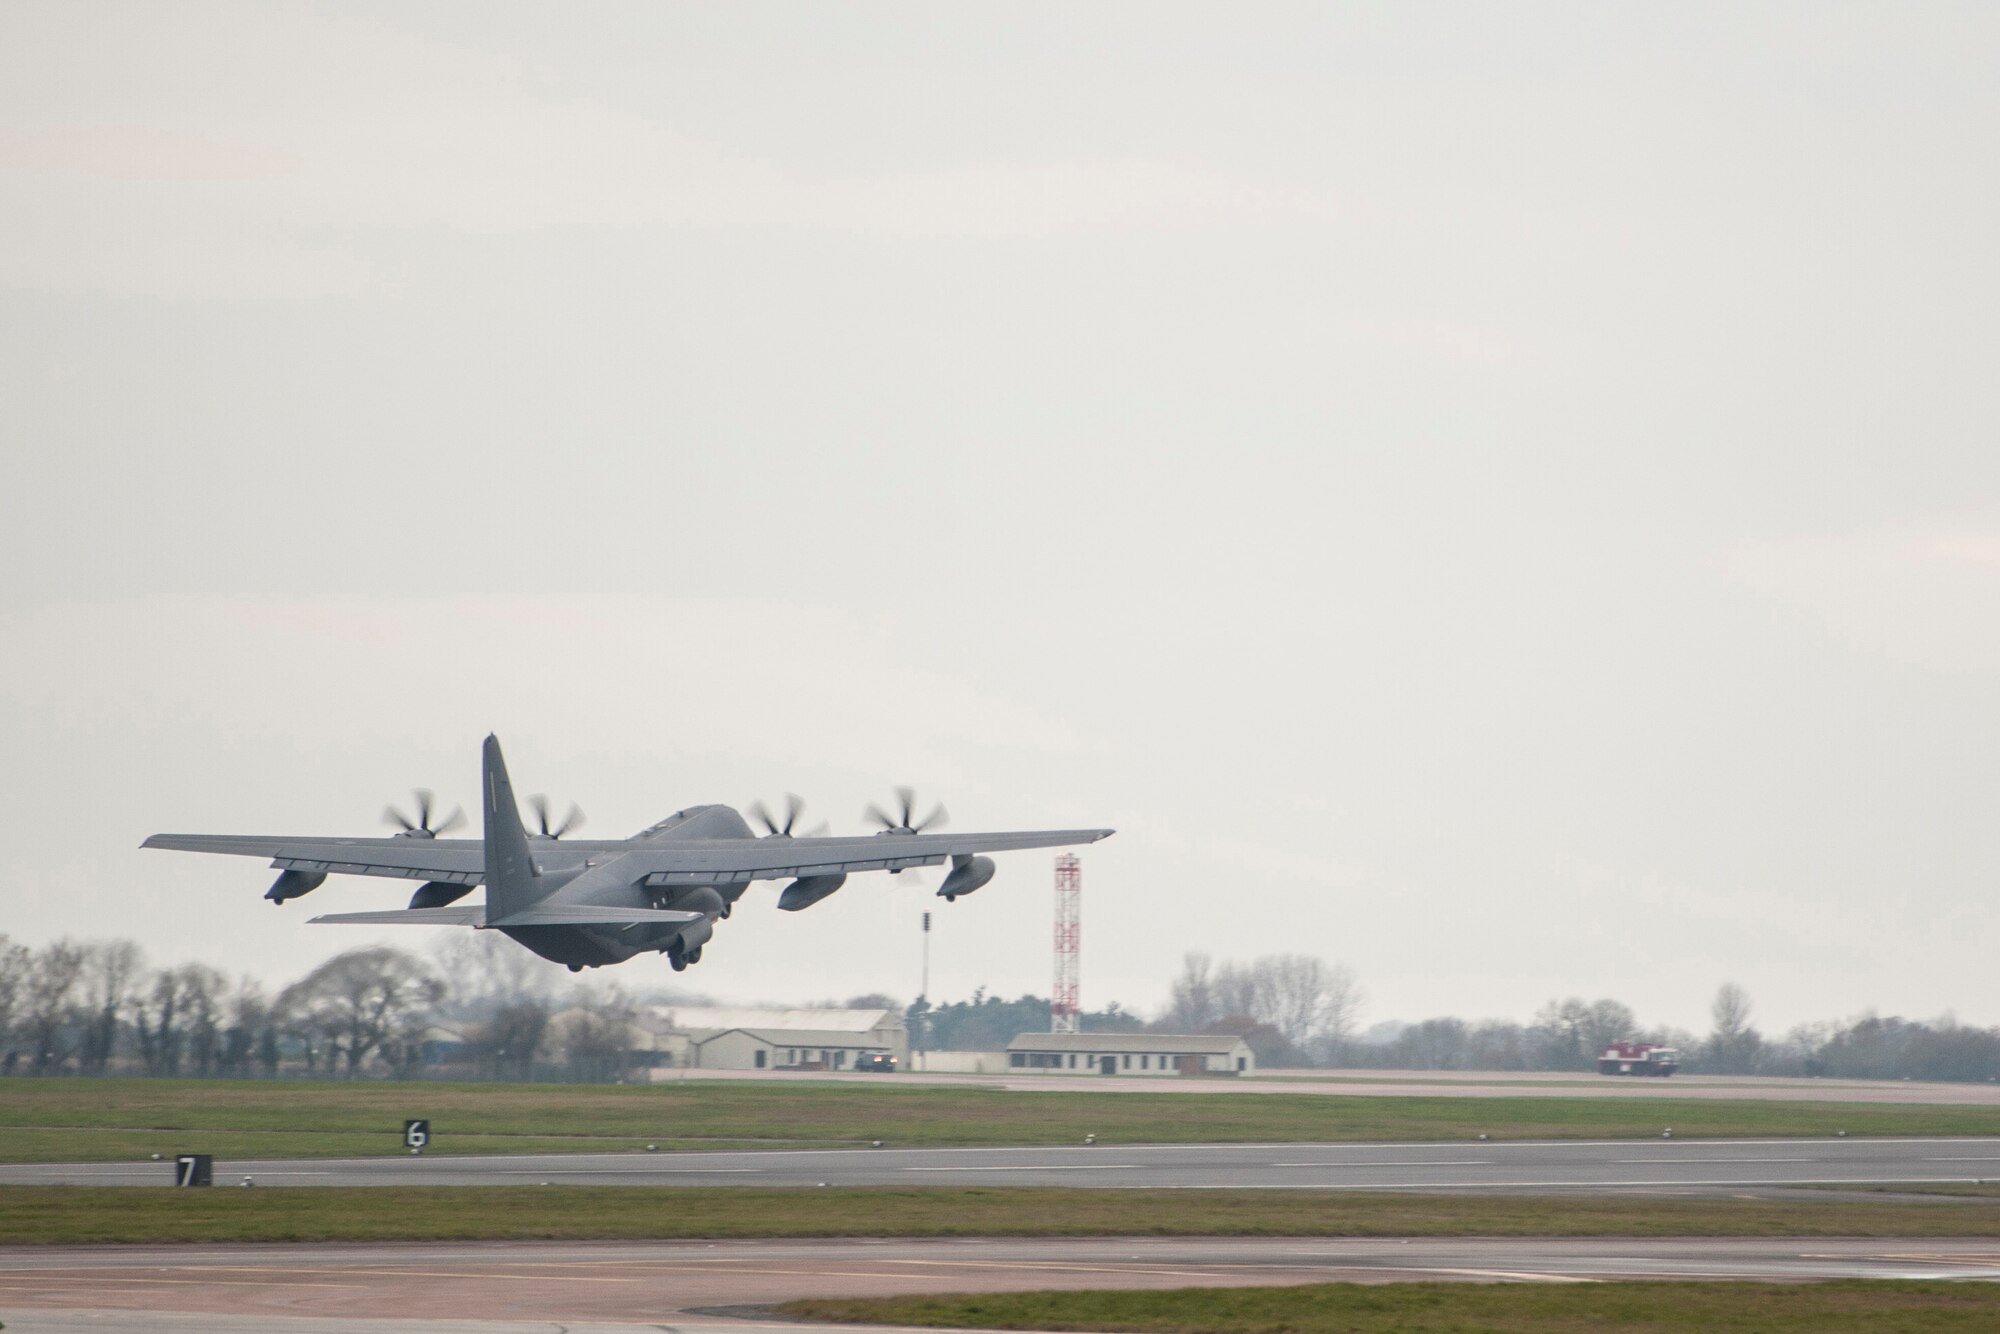 An MC-130J Commando II from the 67th Special Operations Squadron takes off during an exercise at RAF Fairford, England, Dec. 10, 2013. The exercise was designed to allow the 352nd Special Operations Group to practice and evaluate their ability to efficiently forward deploy the 352nd SOG’s newest assets, the CV-22 Osprey and MC-130J Commando II. The MC-130J flies low-visibility, single or multi-ship low-level air refueling missions for helicopters and tilt-rotor aircraft as well as resupply and transport of military forces via airdrop or airland. (U.S. Air Force photo by Staff Sgt. Stephen Linch/Released)